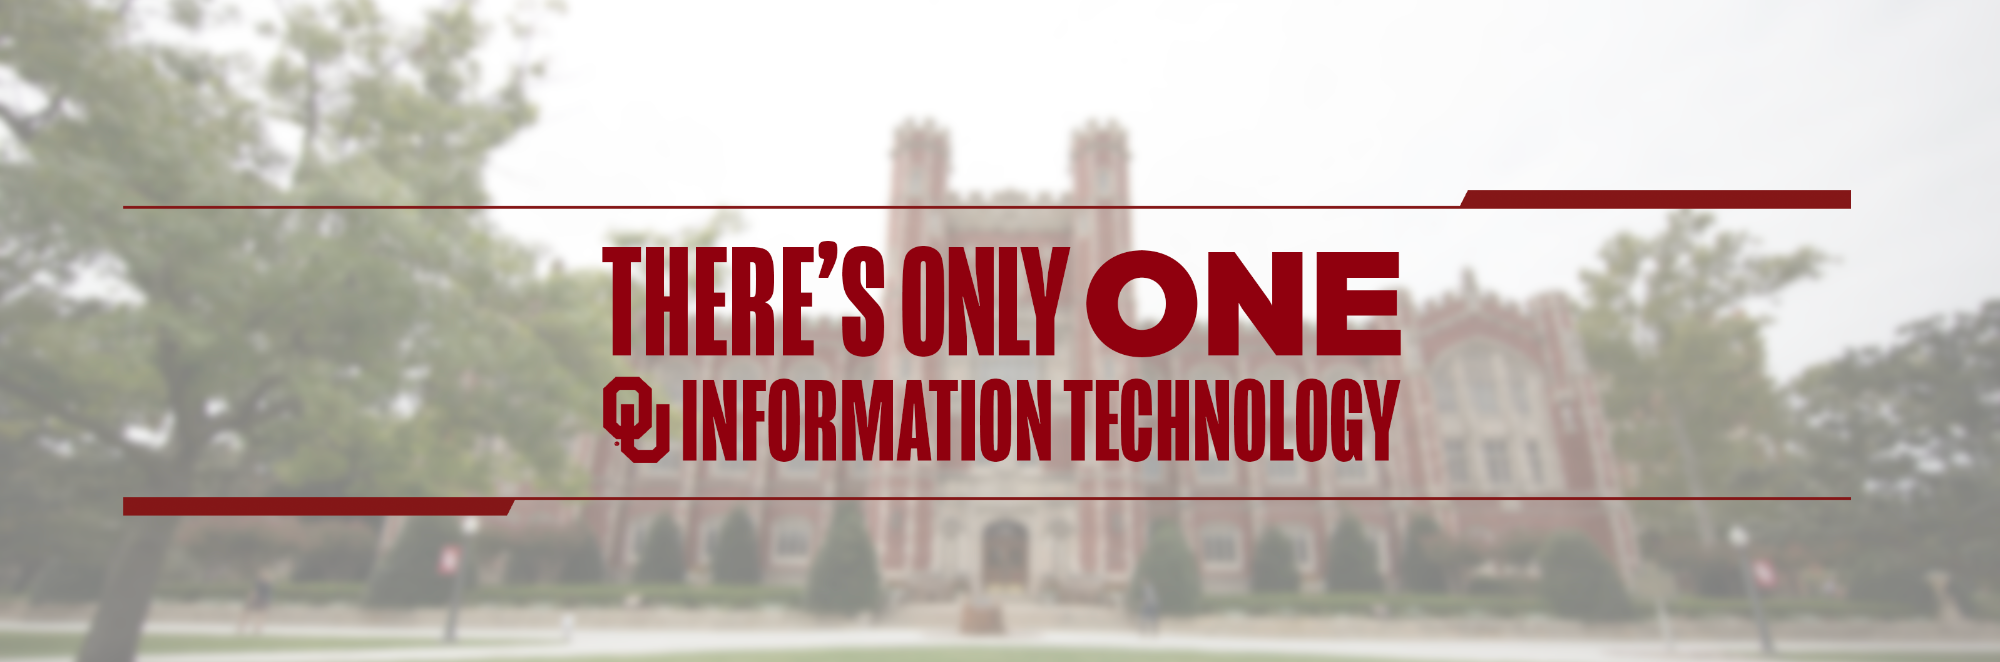 Evans building on OU's campus in Norman Oklahoma. Overlay text that says There's only one OU information technology.